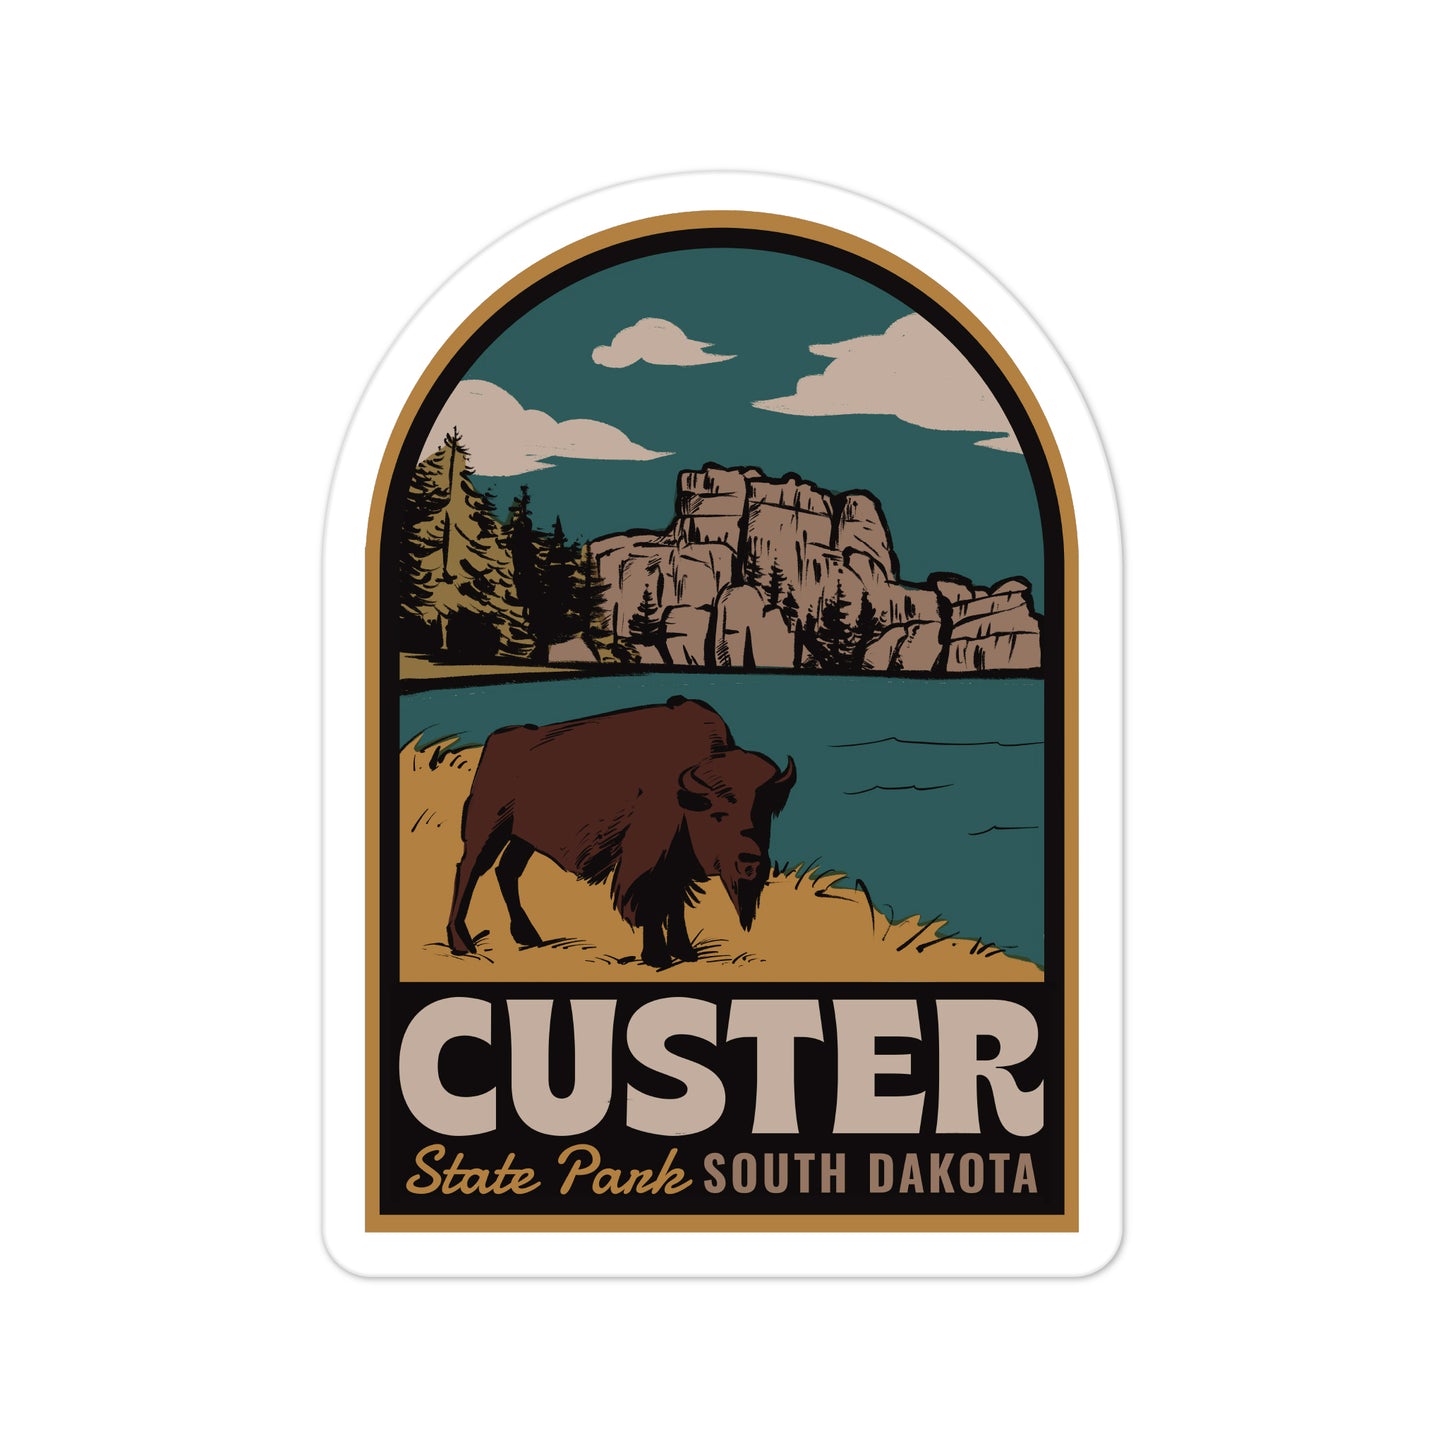 A sticker of Custer State Park